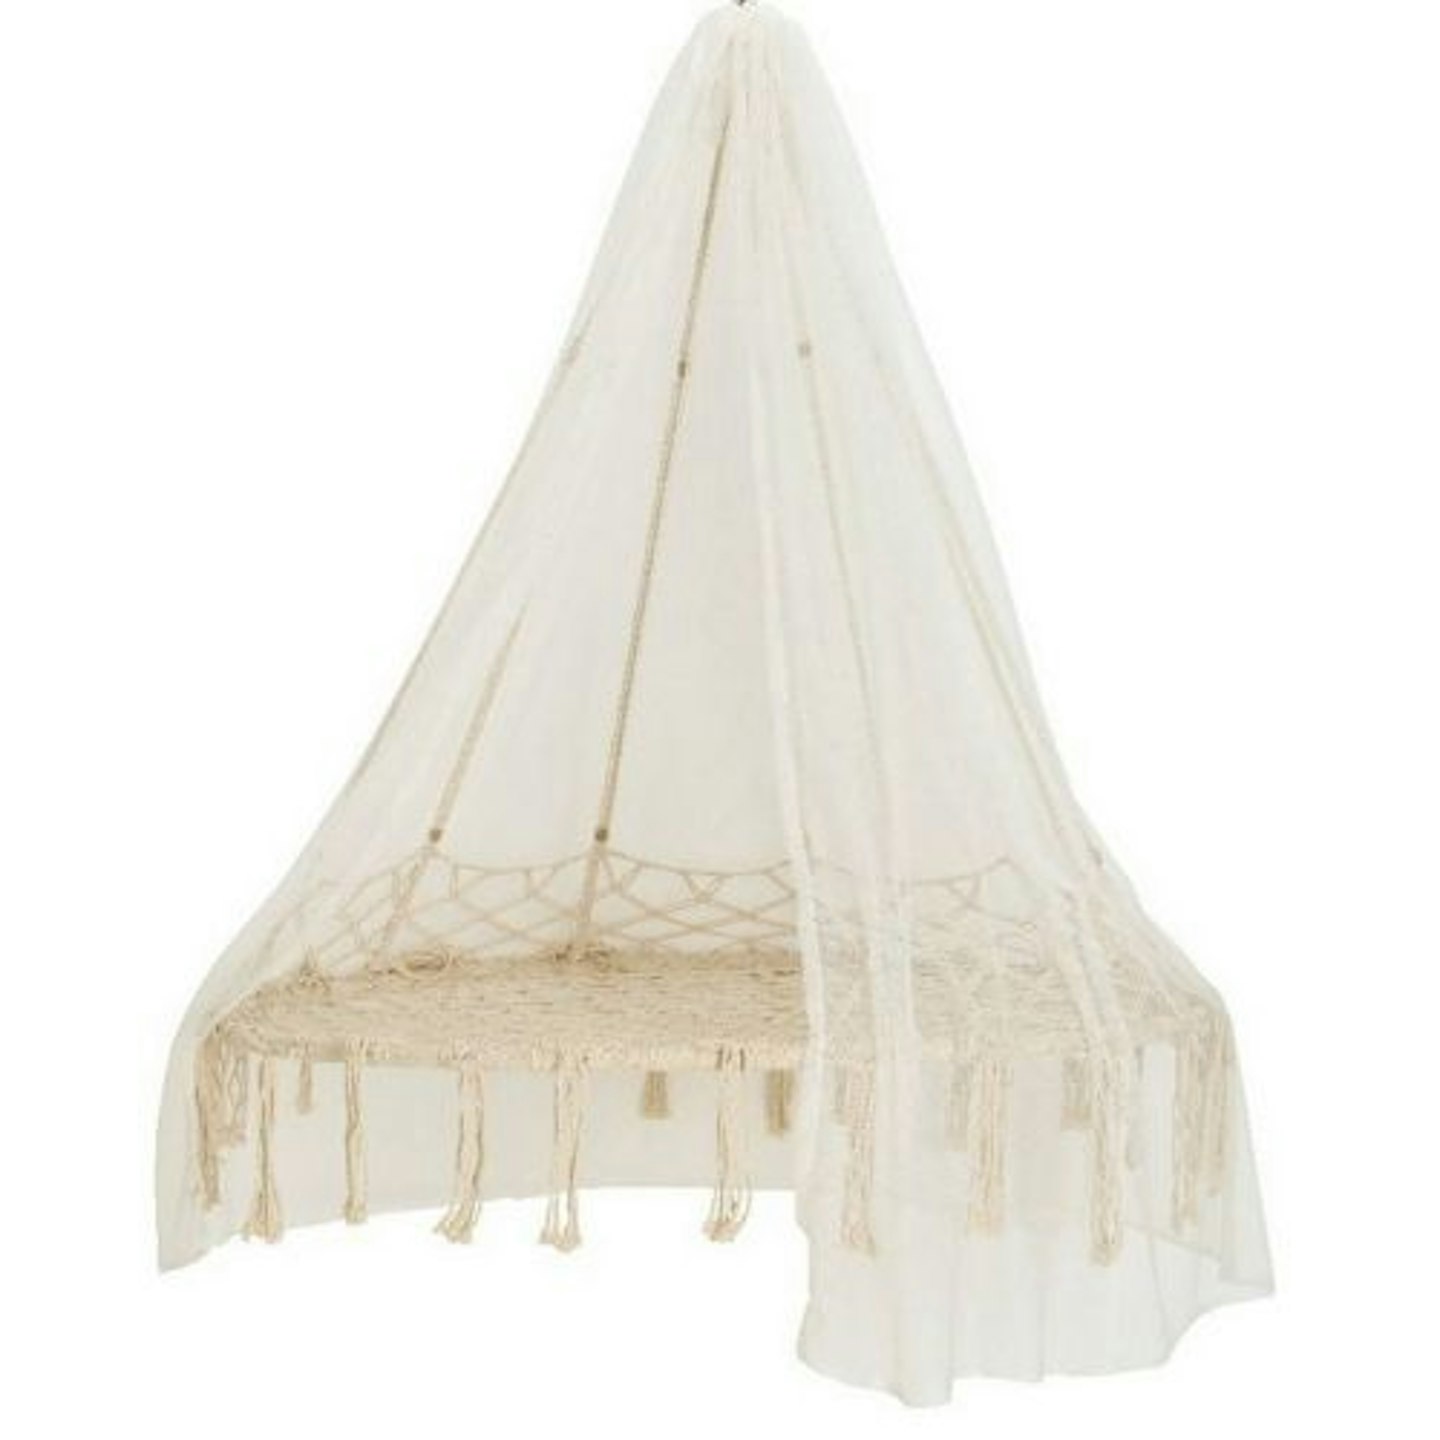 Macrame Hanging Chair With Canopy